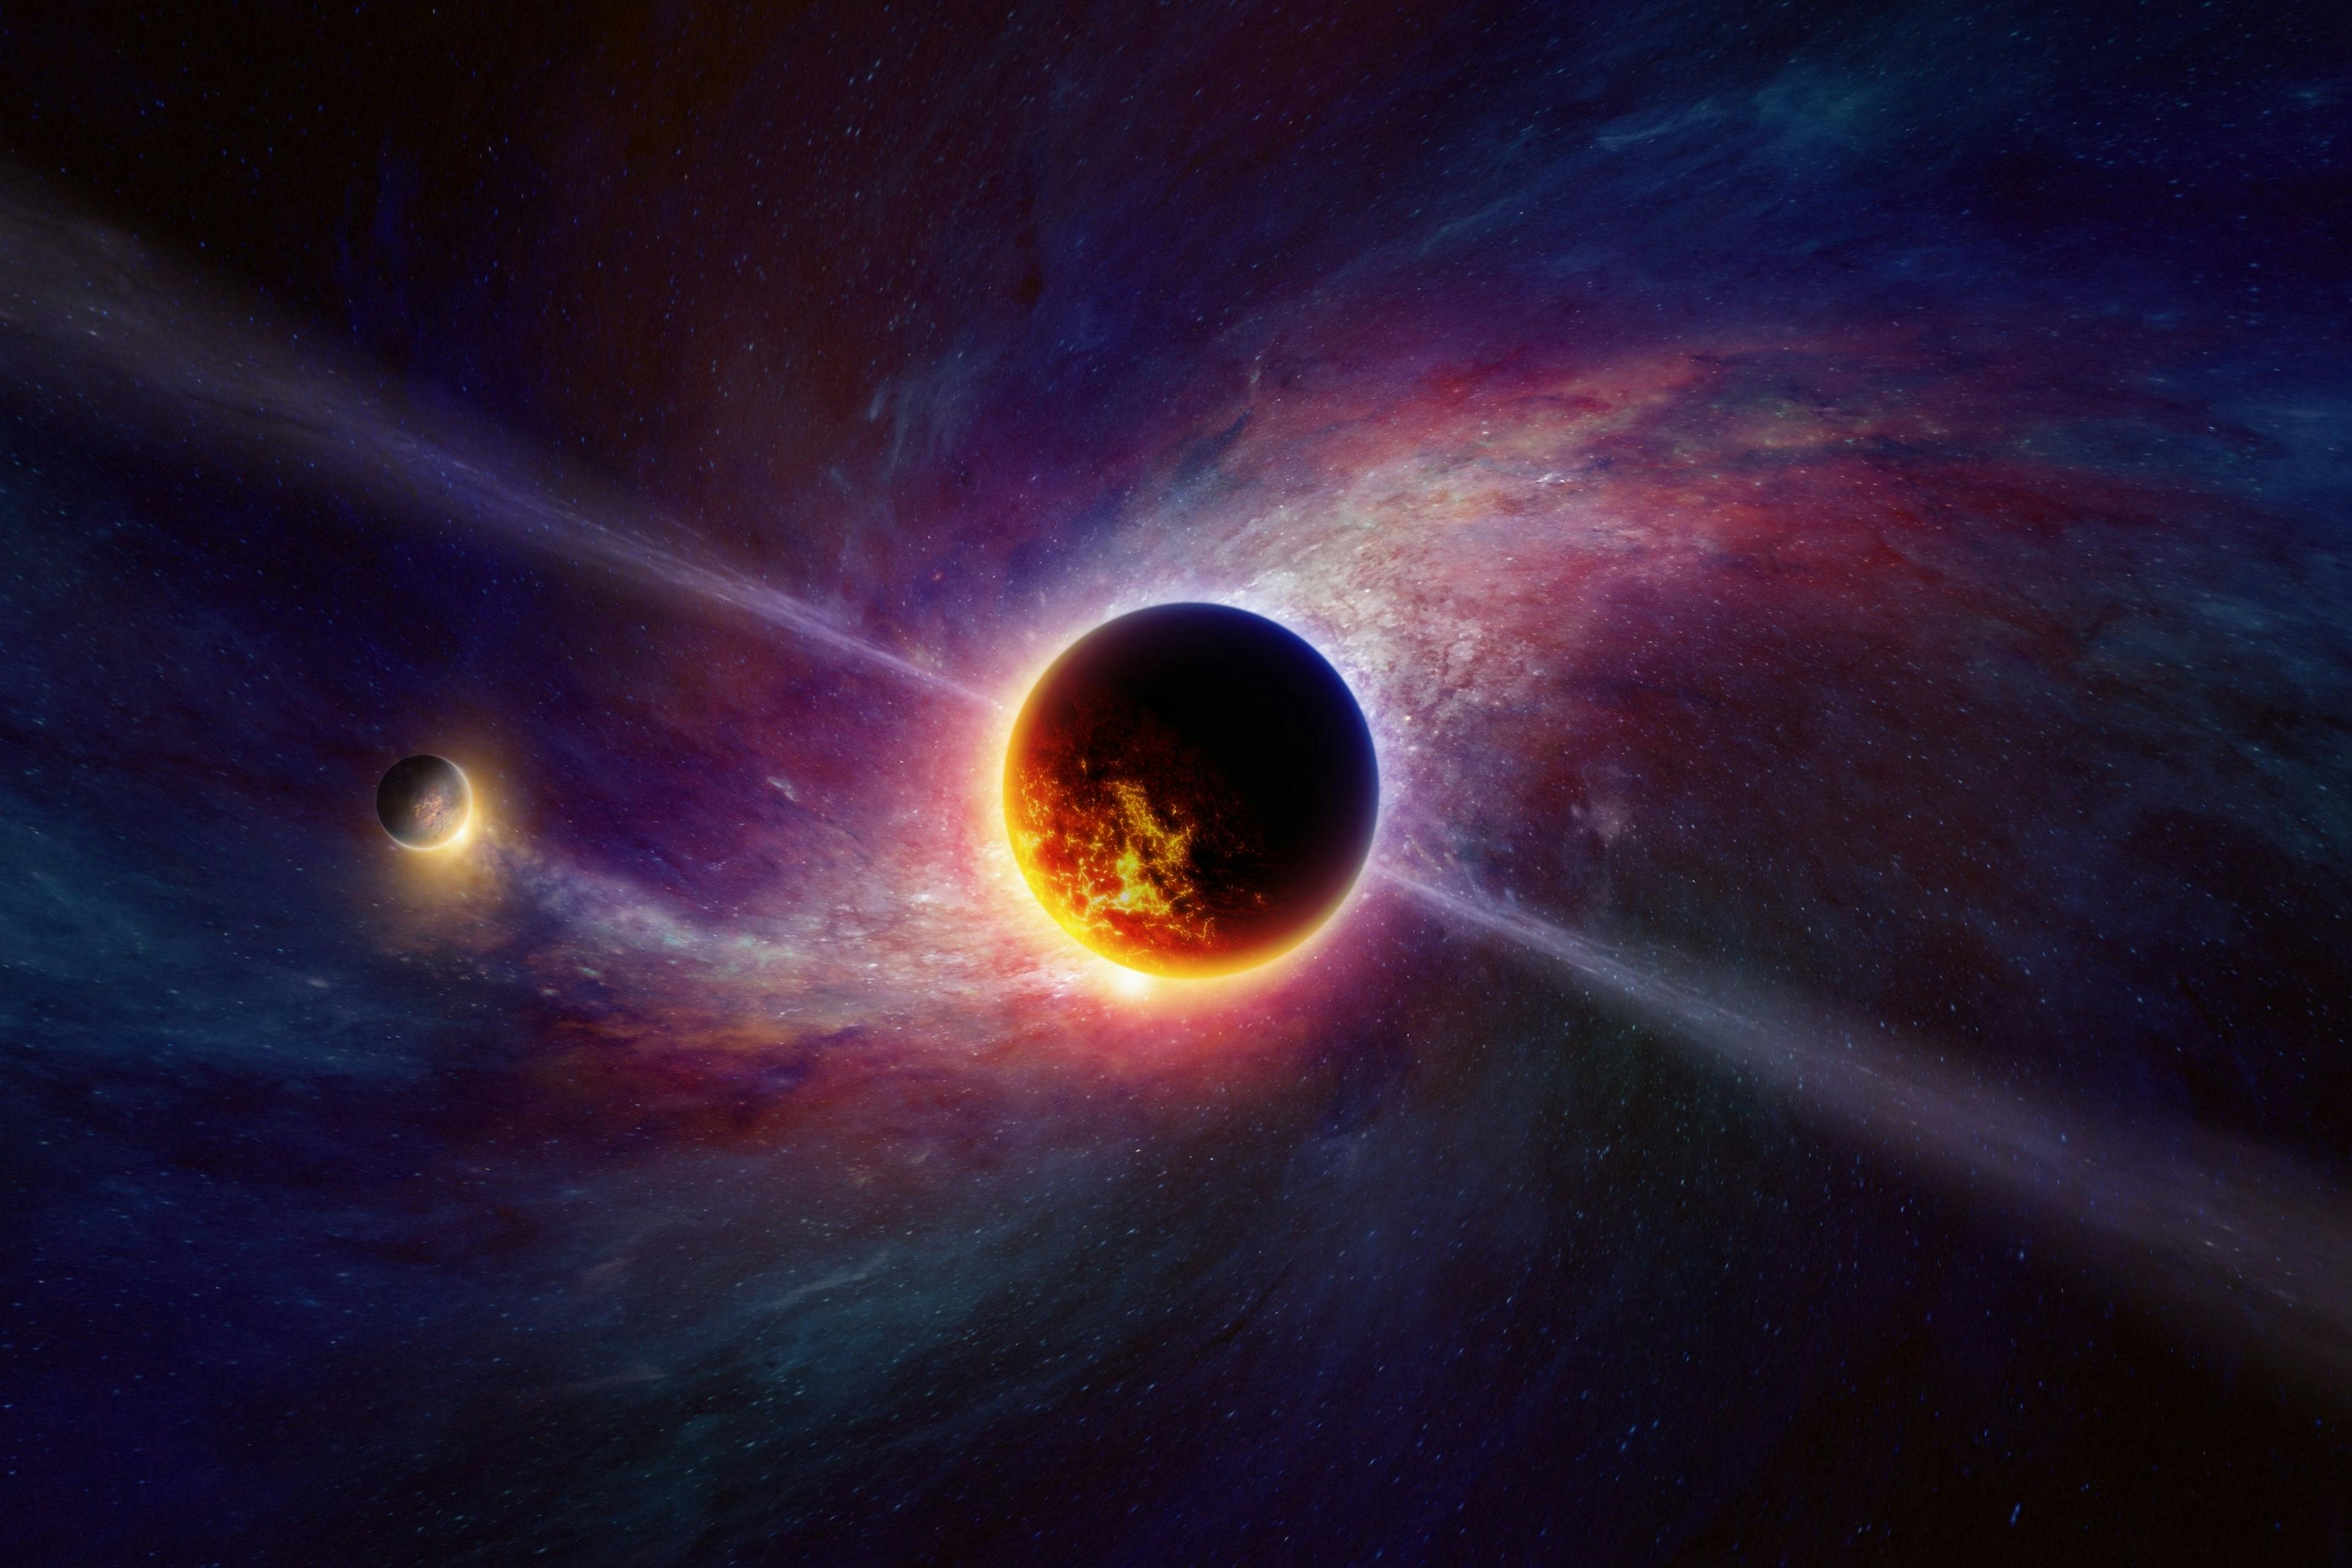 Abstract scientific image, glowing exoplanets in deep space on background of spiral galaxy. Exoplanet or extrasolar planet is planet outside Solar System. | Image Credit: © IgorZh - stock.adobe.com